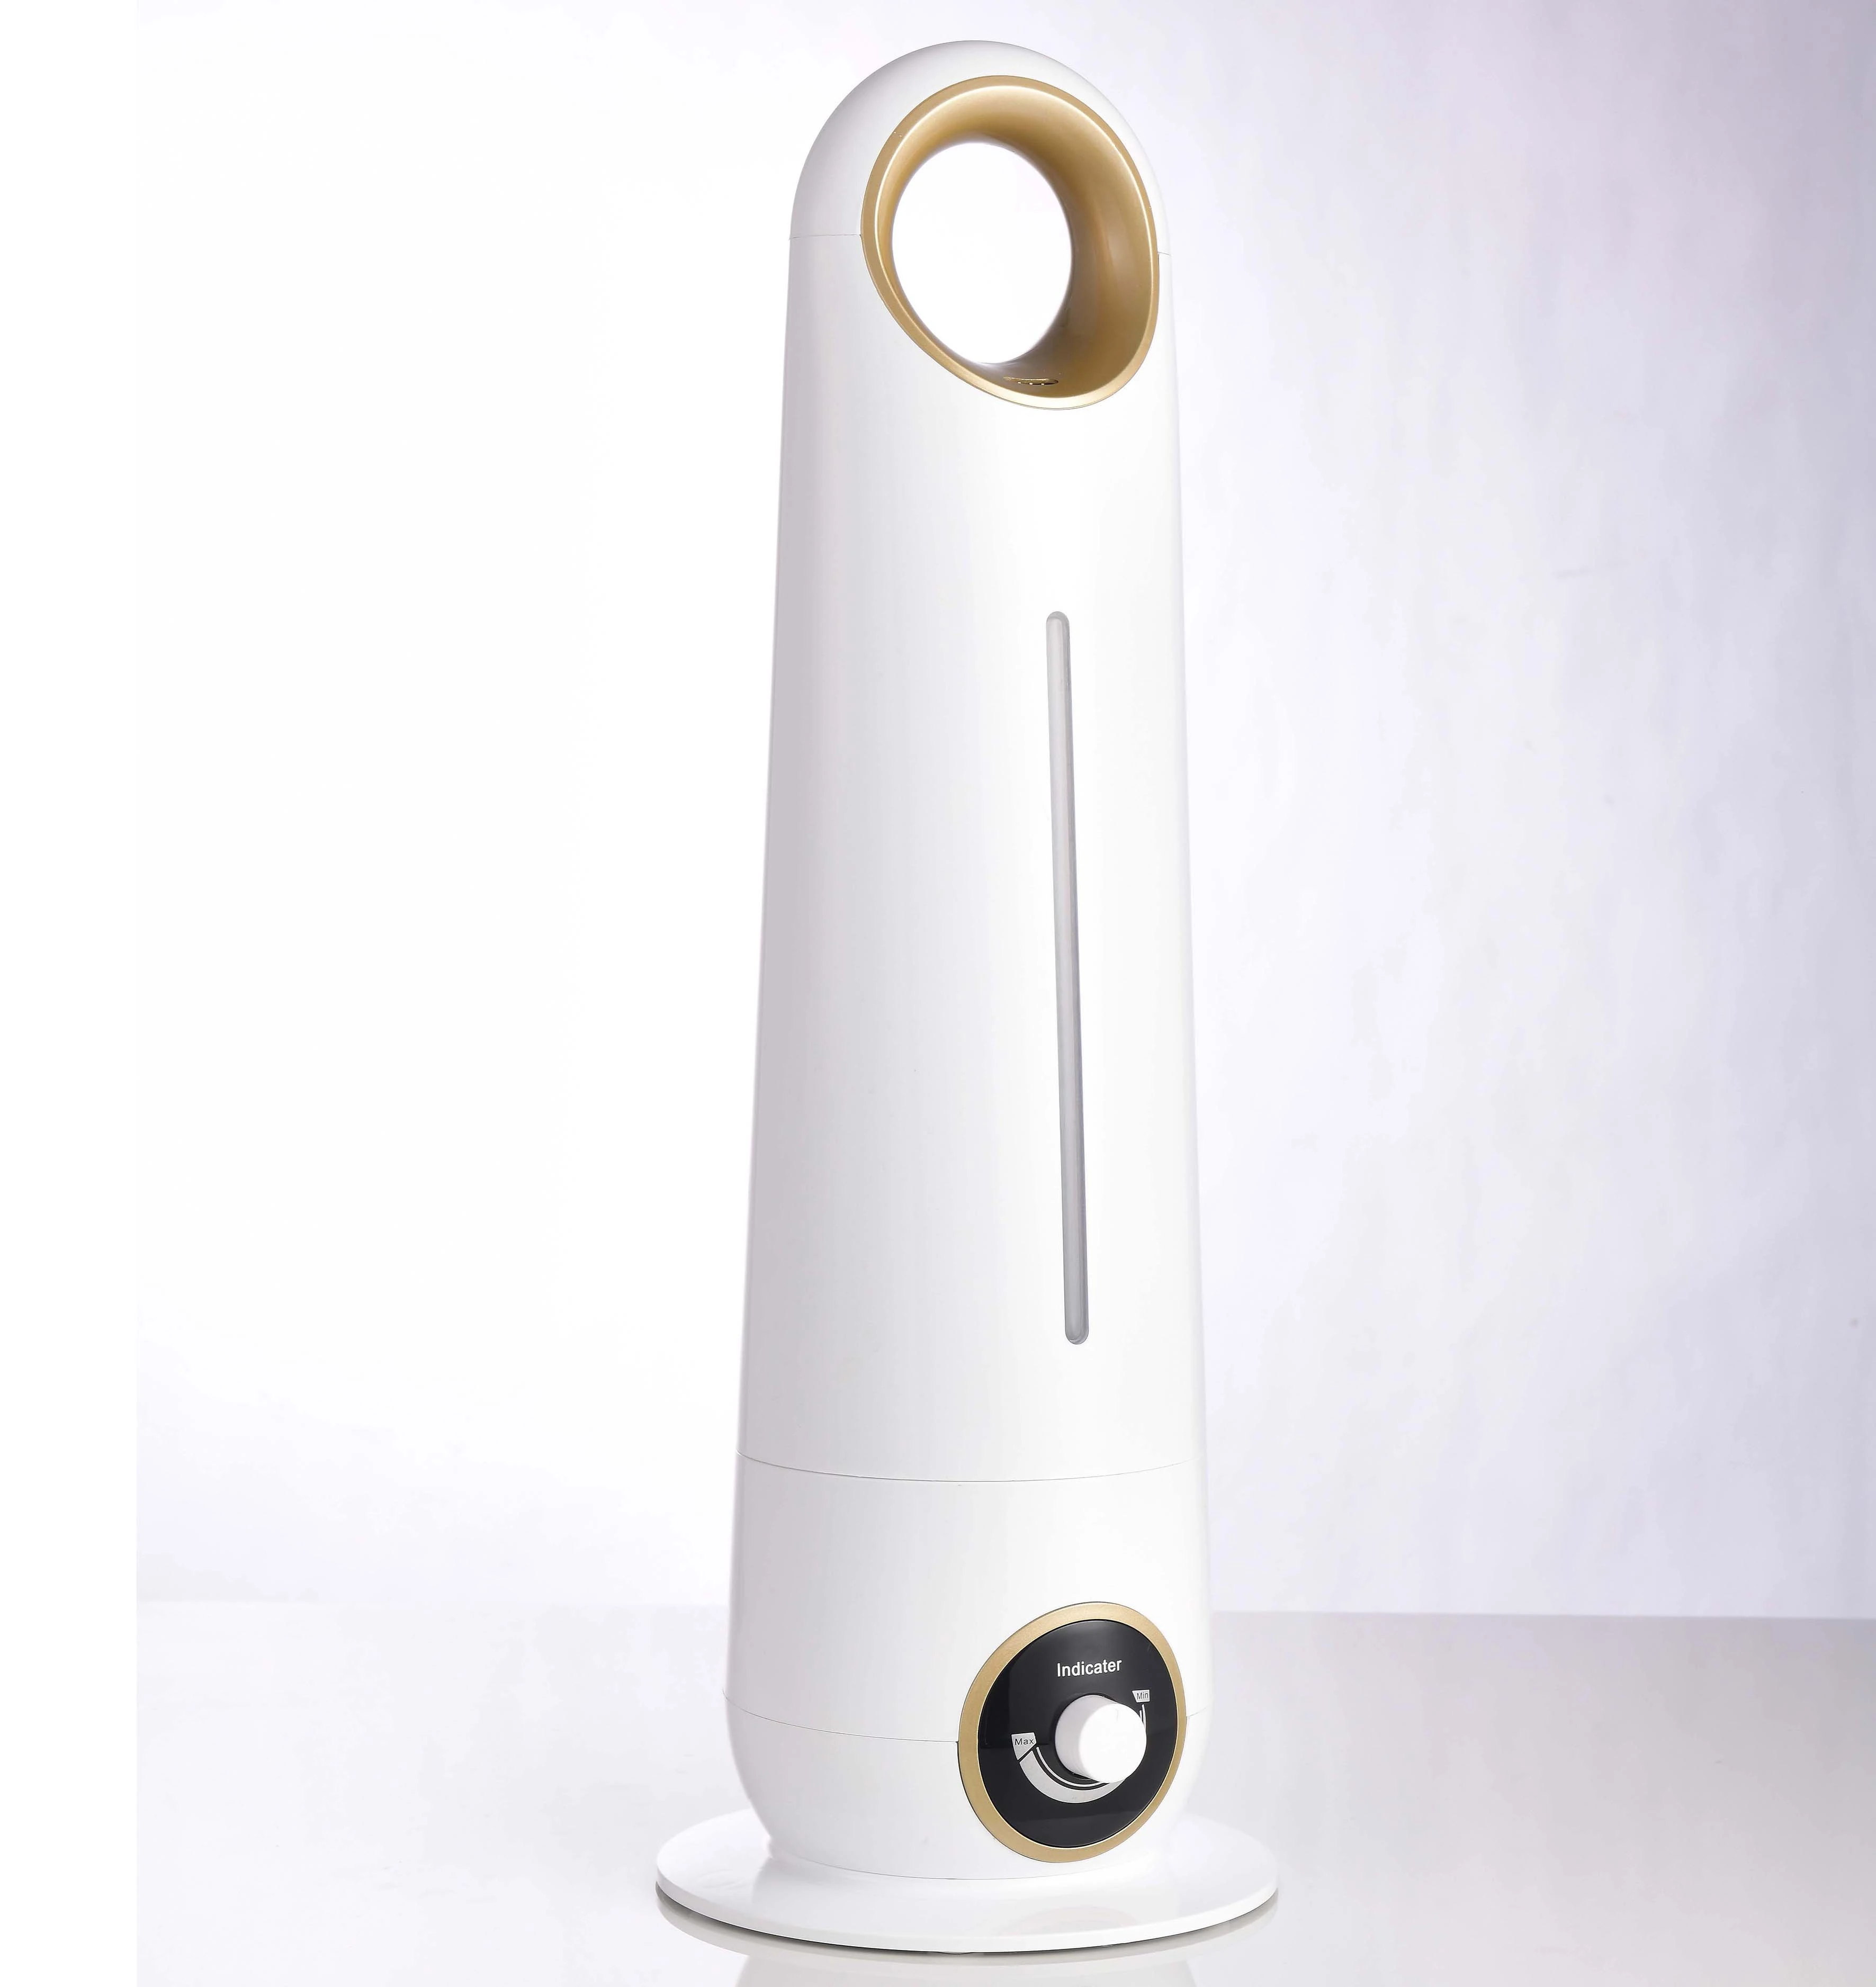 New Wholesale 4L Land Standing Hotel Lobby Ultrasonic Humidifier For Large Area Humidifier Innovation Air Humidifier